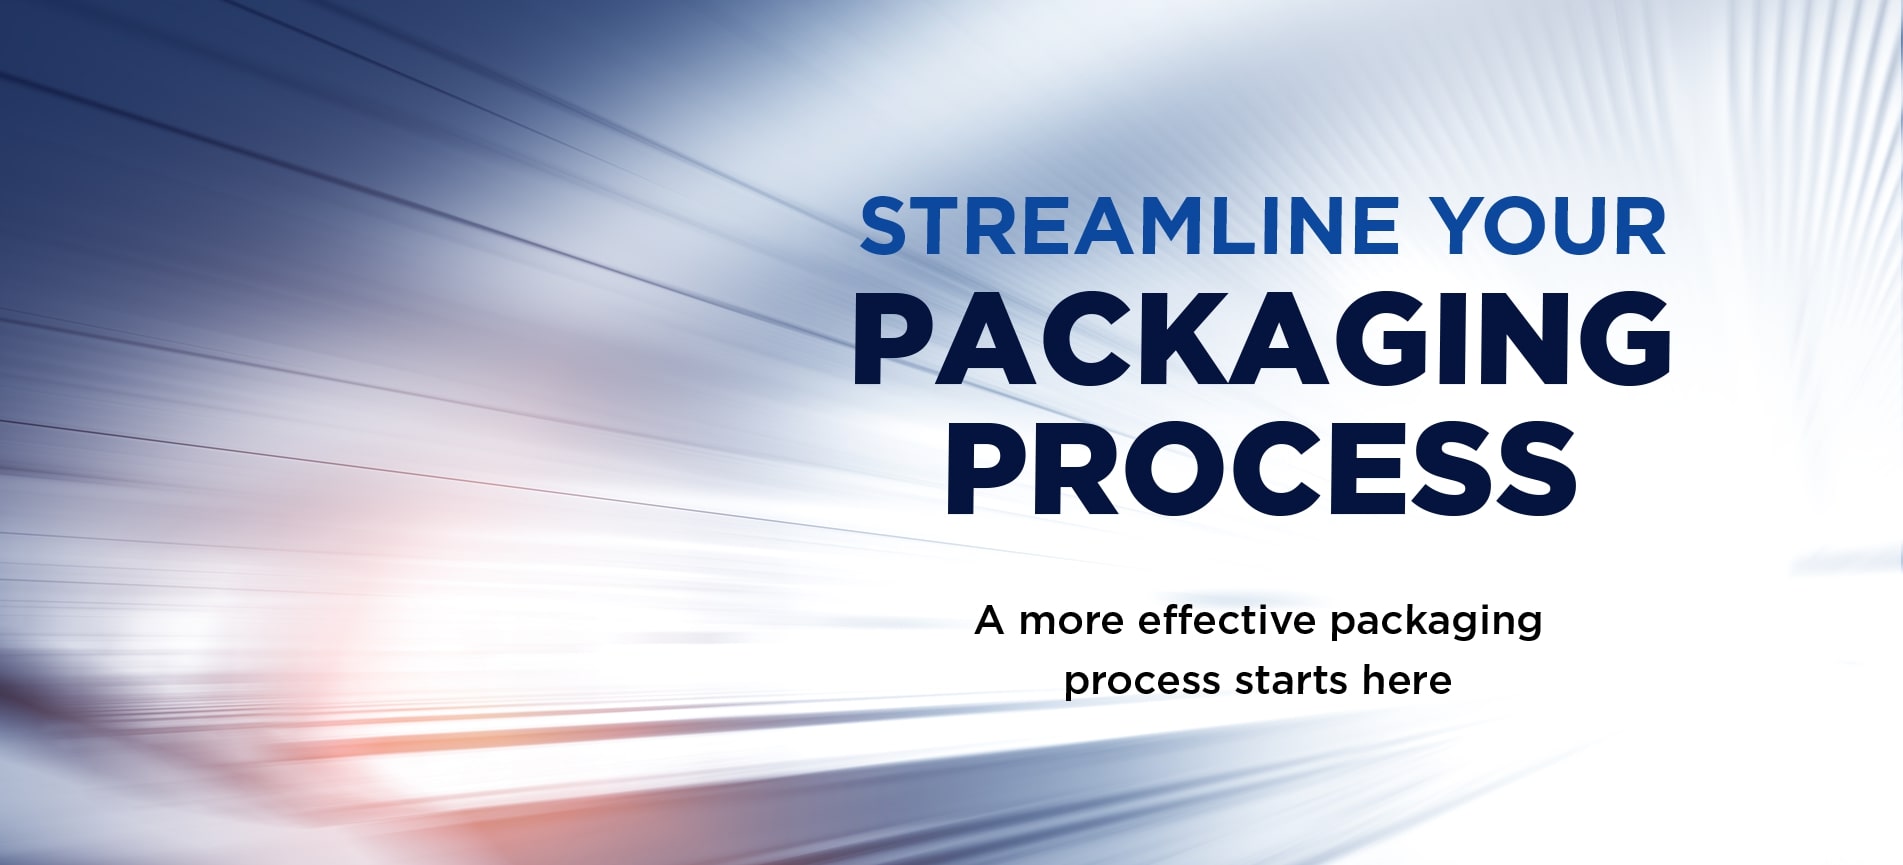 Streamline Your Packaging Process